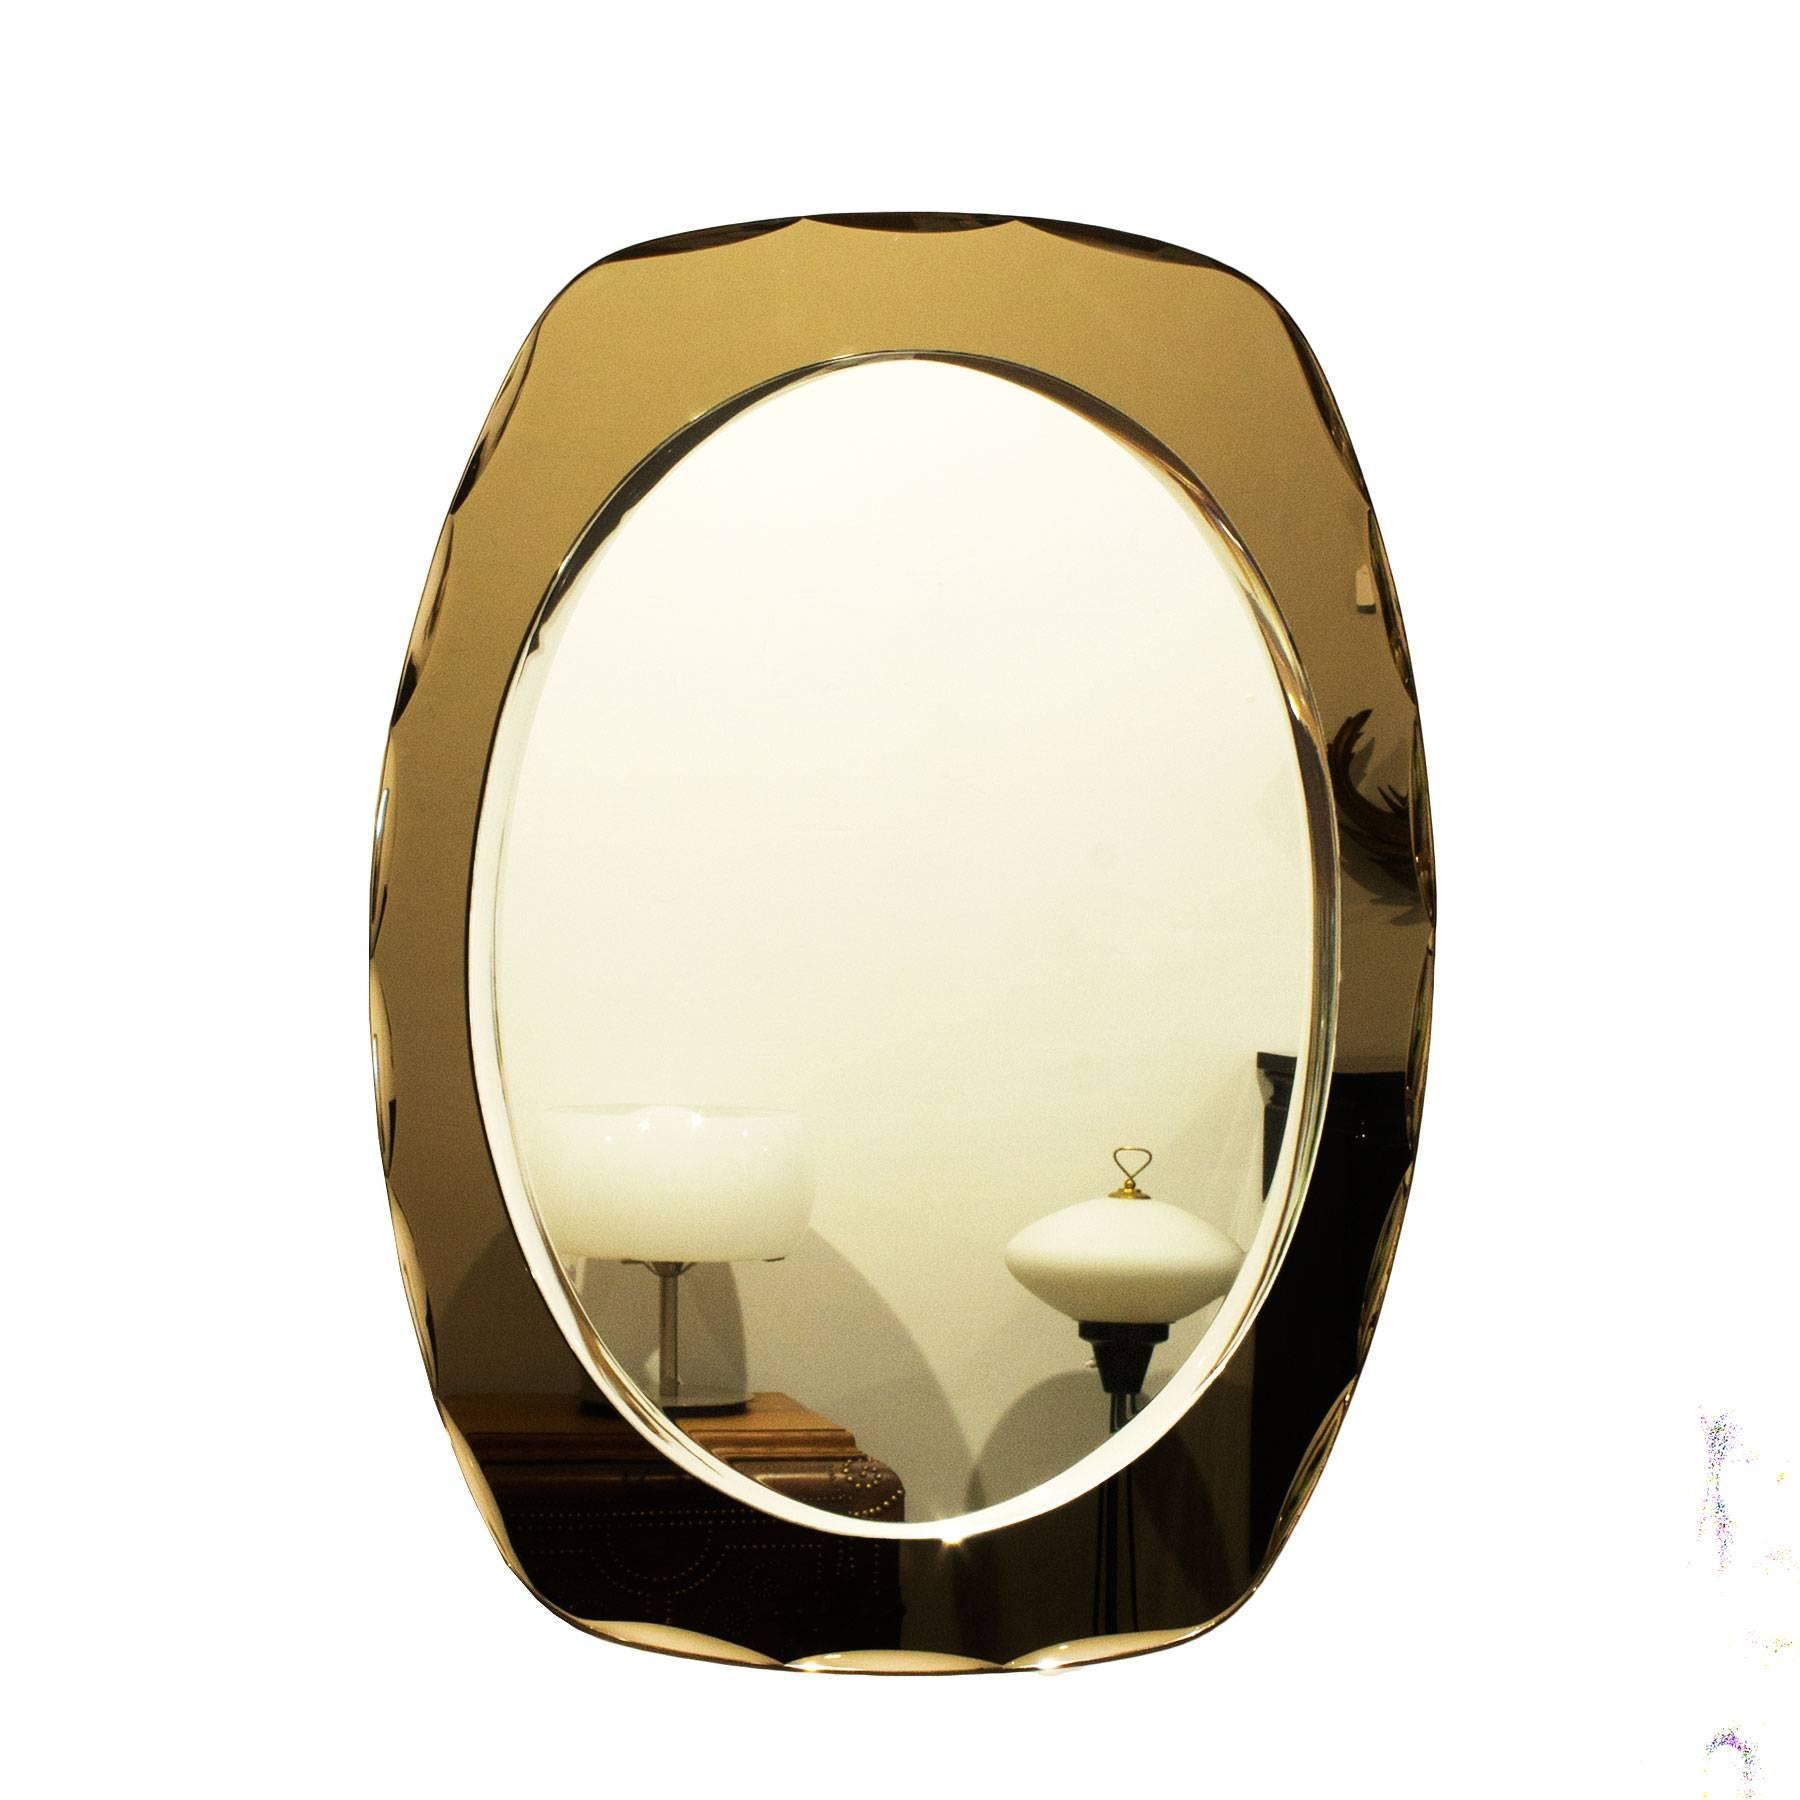 Bevelled mirror with smoked bronze decorative bevelled mirror frame.

Italy, circa 1960.